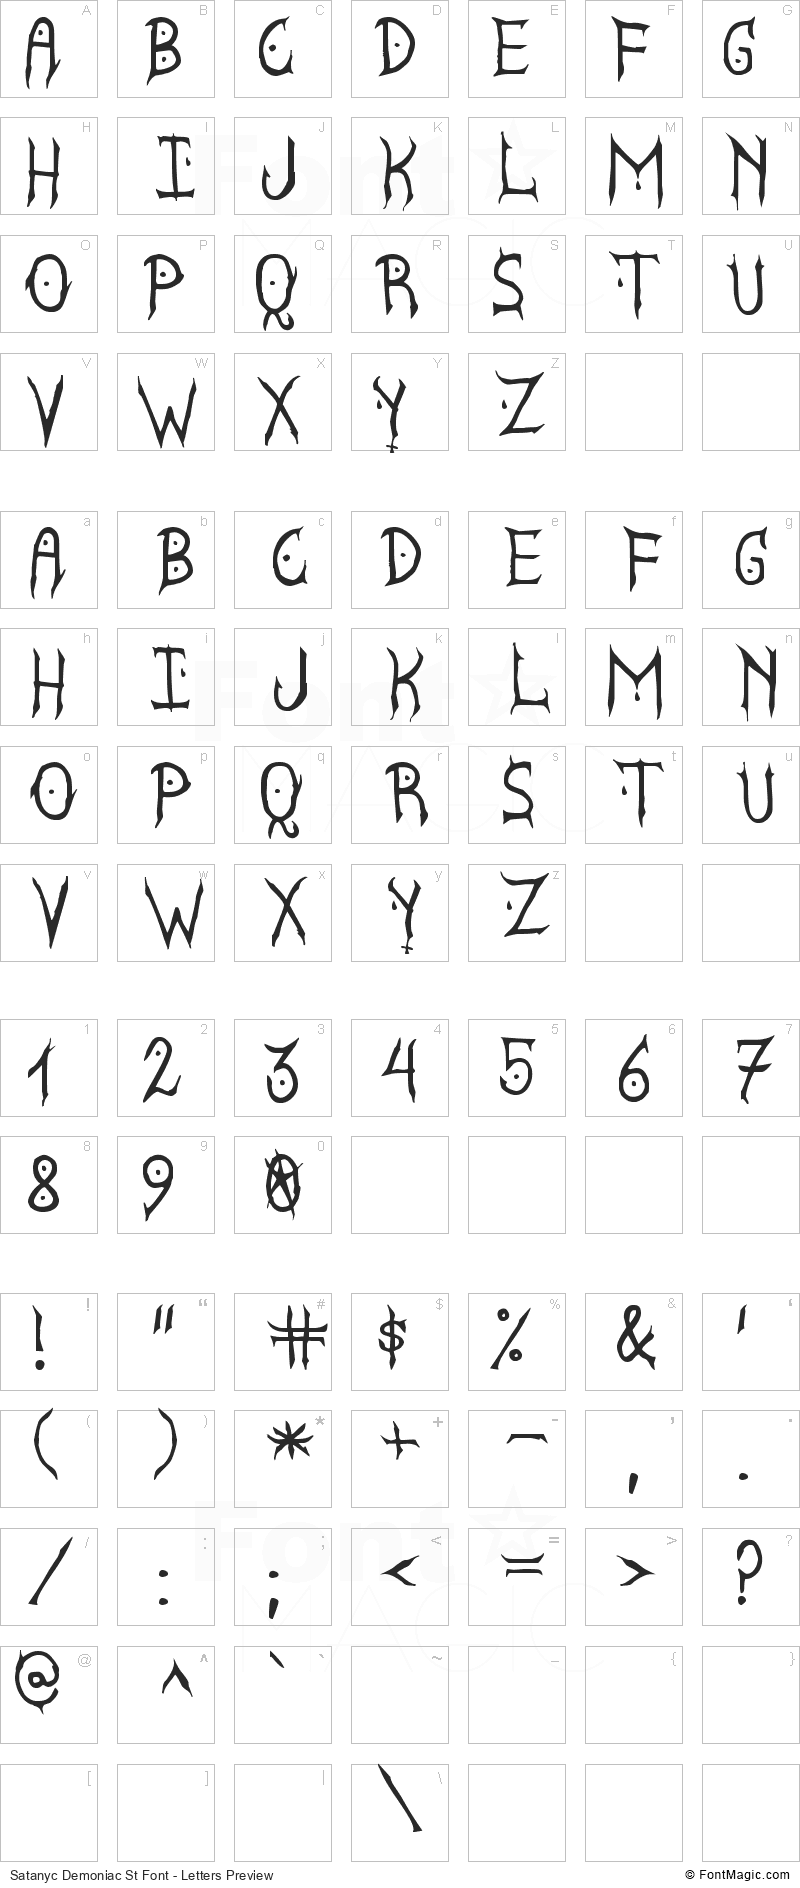 Satanyc Demoniac St Font - All Latters Preview Chart